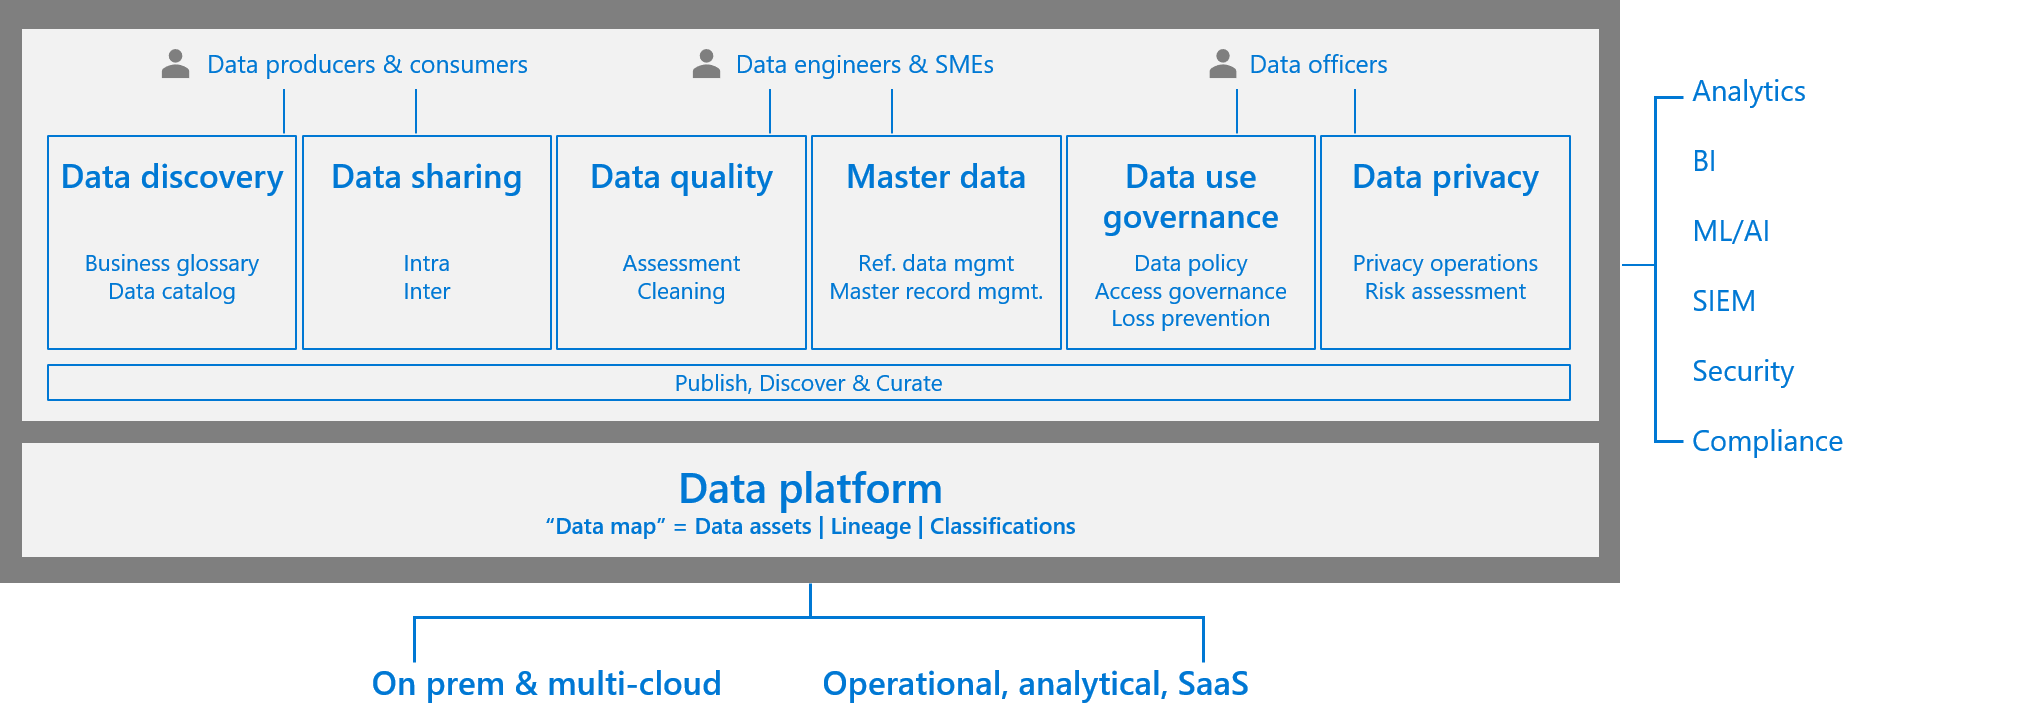 Figure 1: End-to-end unified data governance strategy 